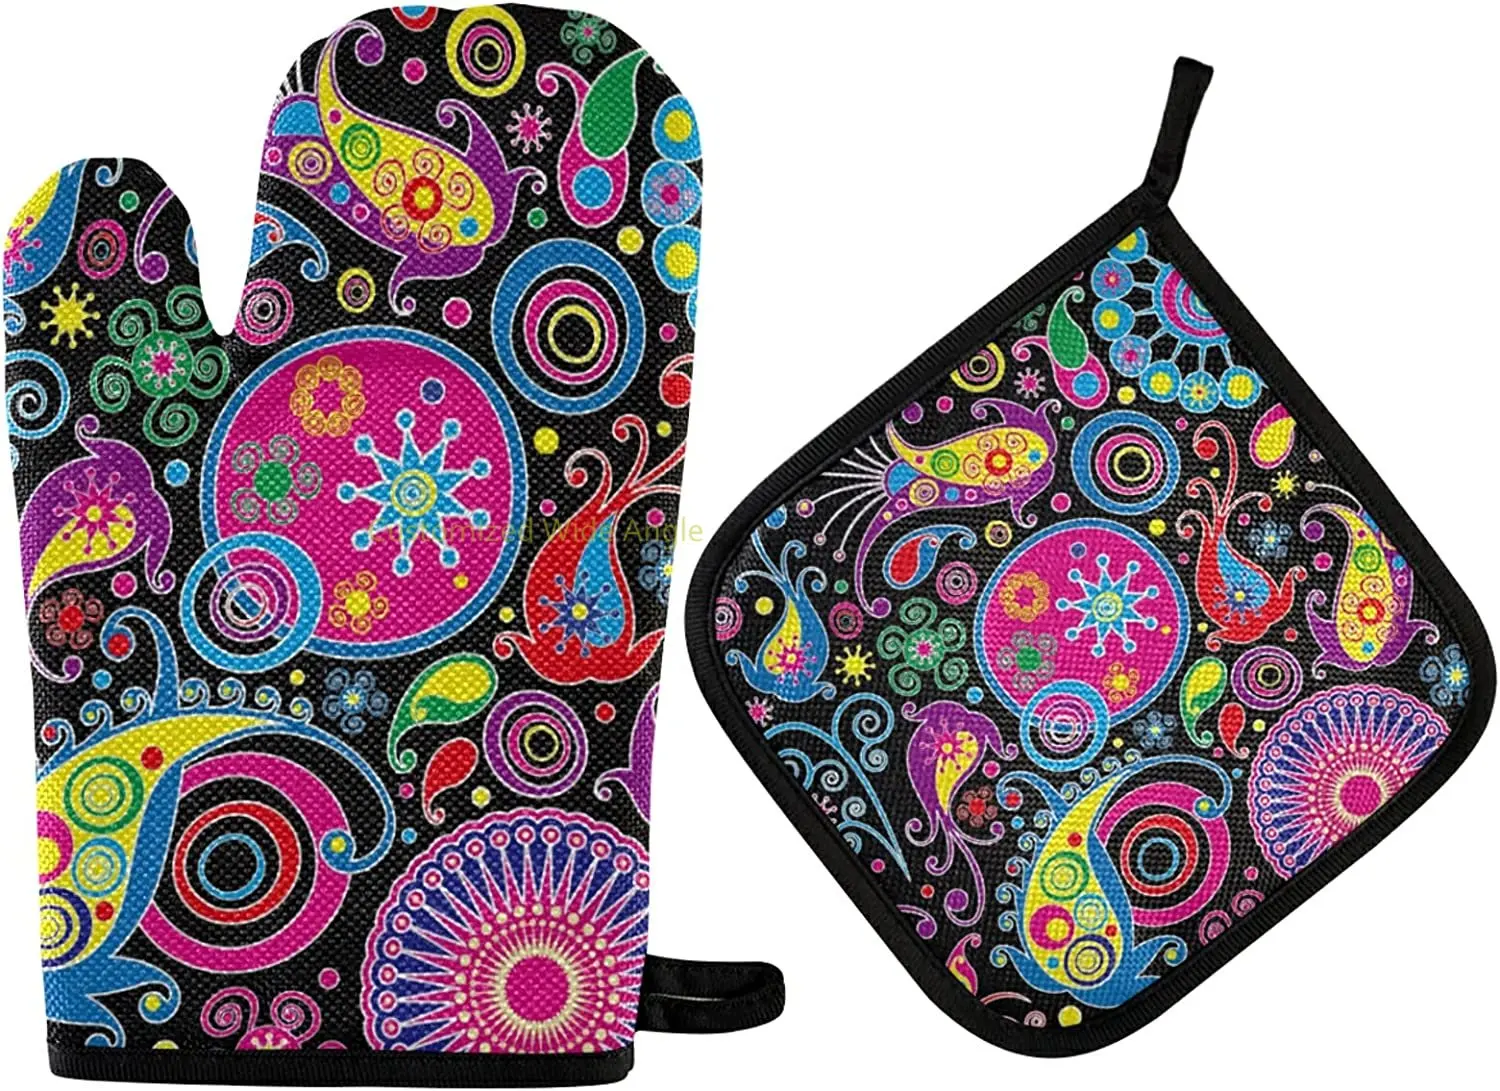 

Flowers and Paisley Oven Mitts and Pot Holders Insulated Gloves & Kitchen Counter Safe Mats for Cooking BBQ Baking Grilling